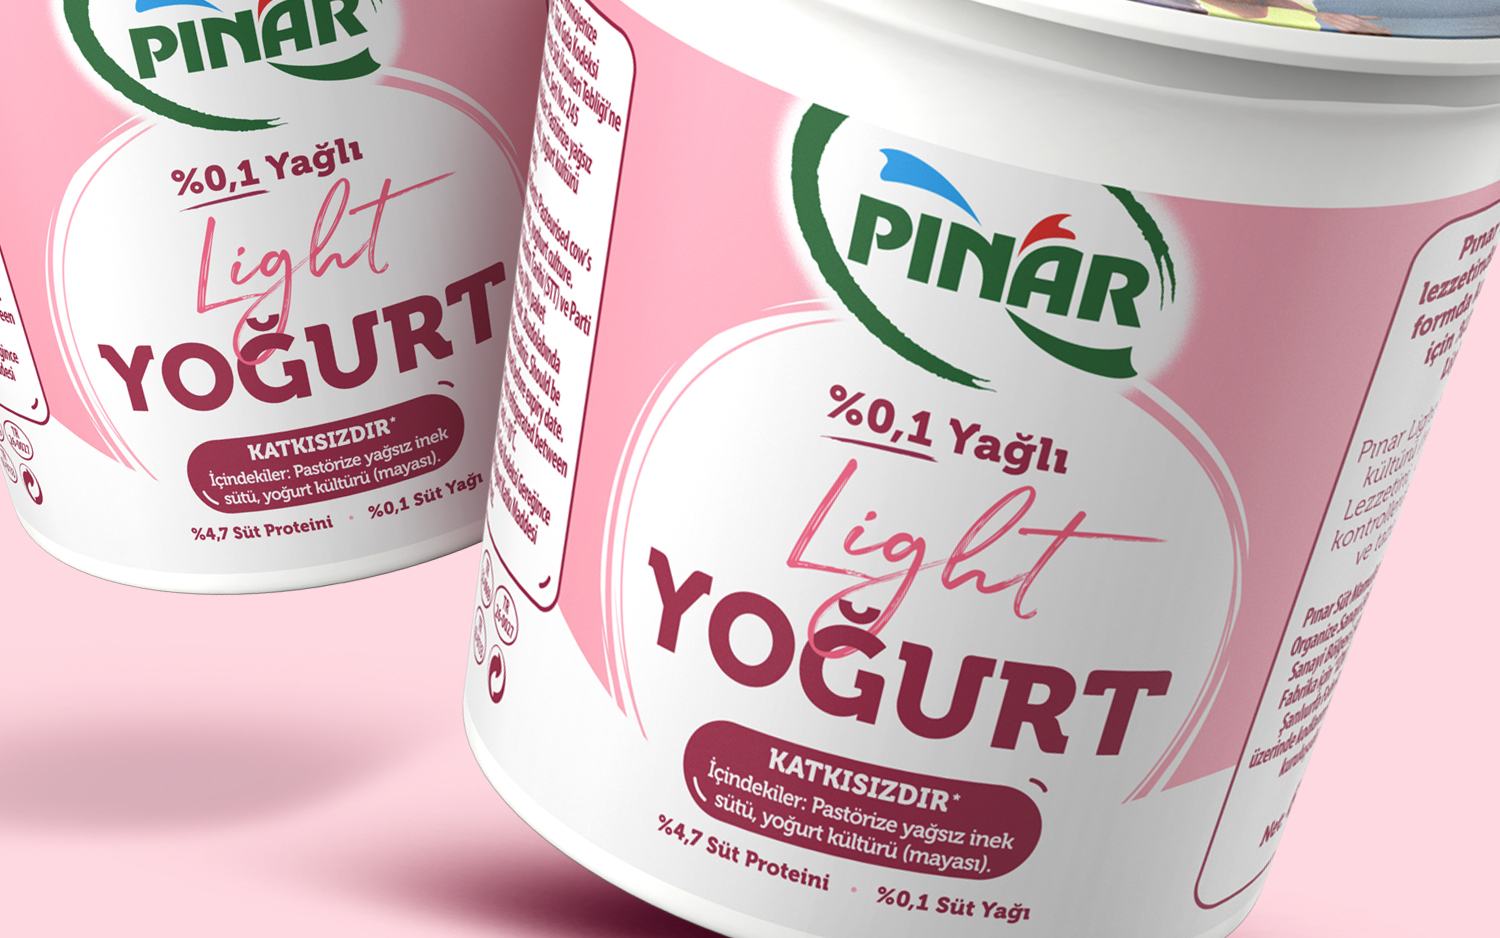 Here's Why Everyone In The Us Is Talking About This Lesbian Yoghurt Ad